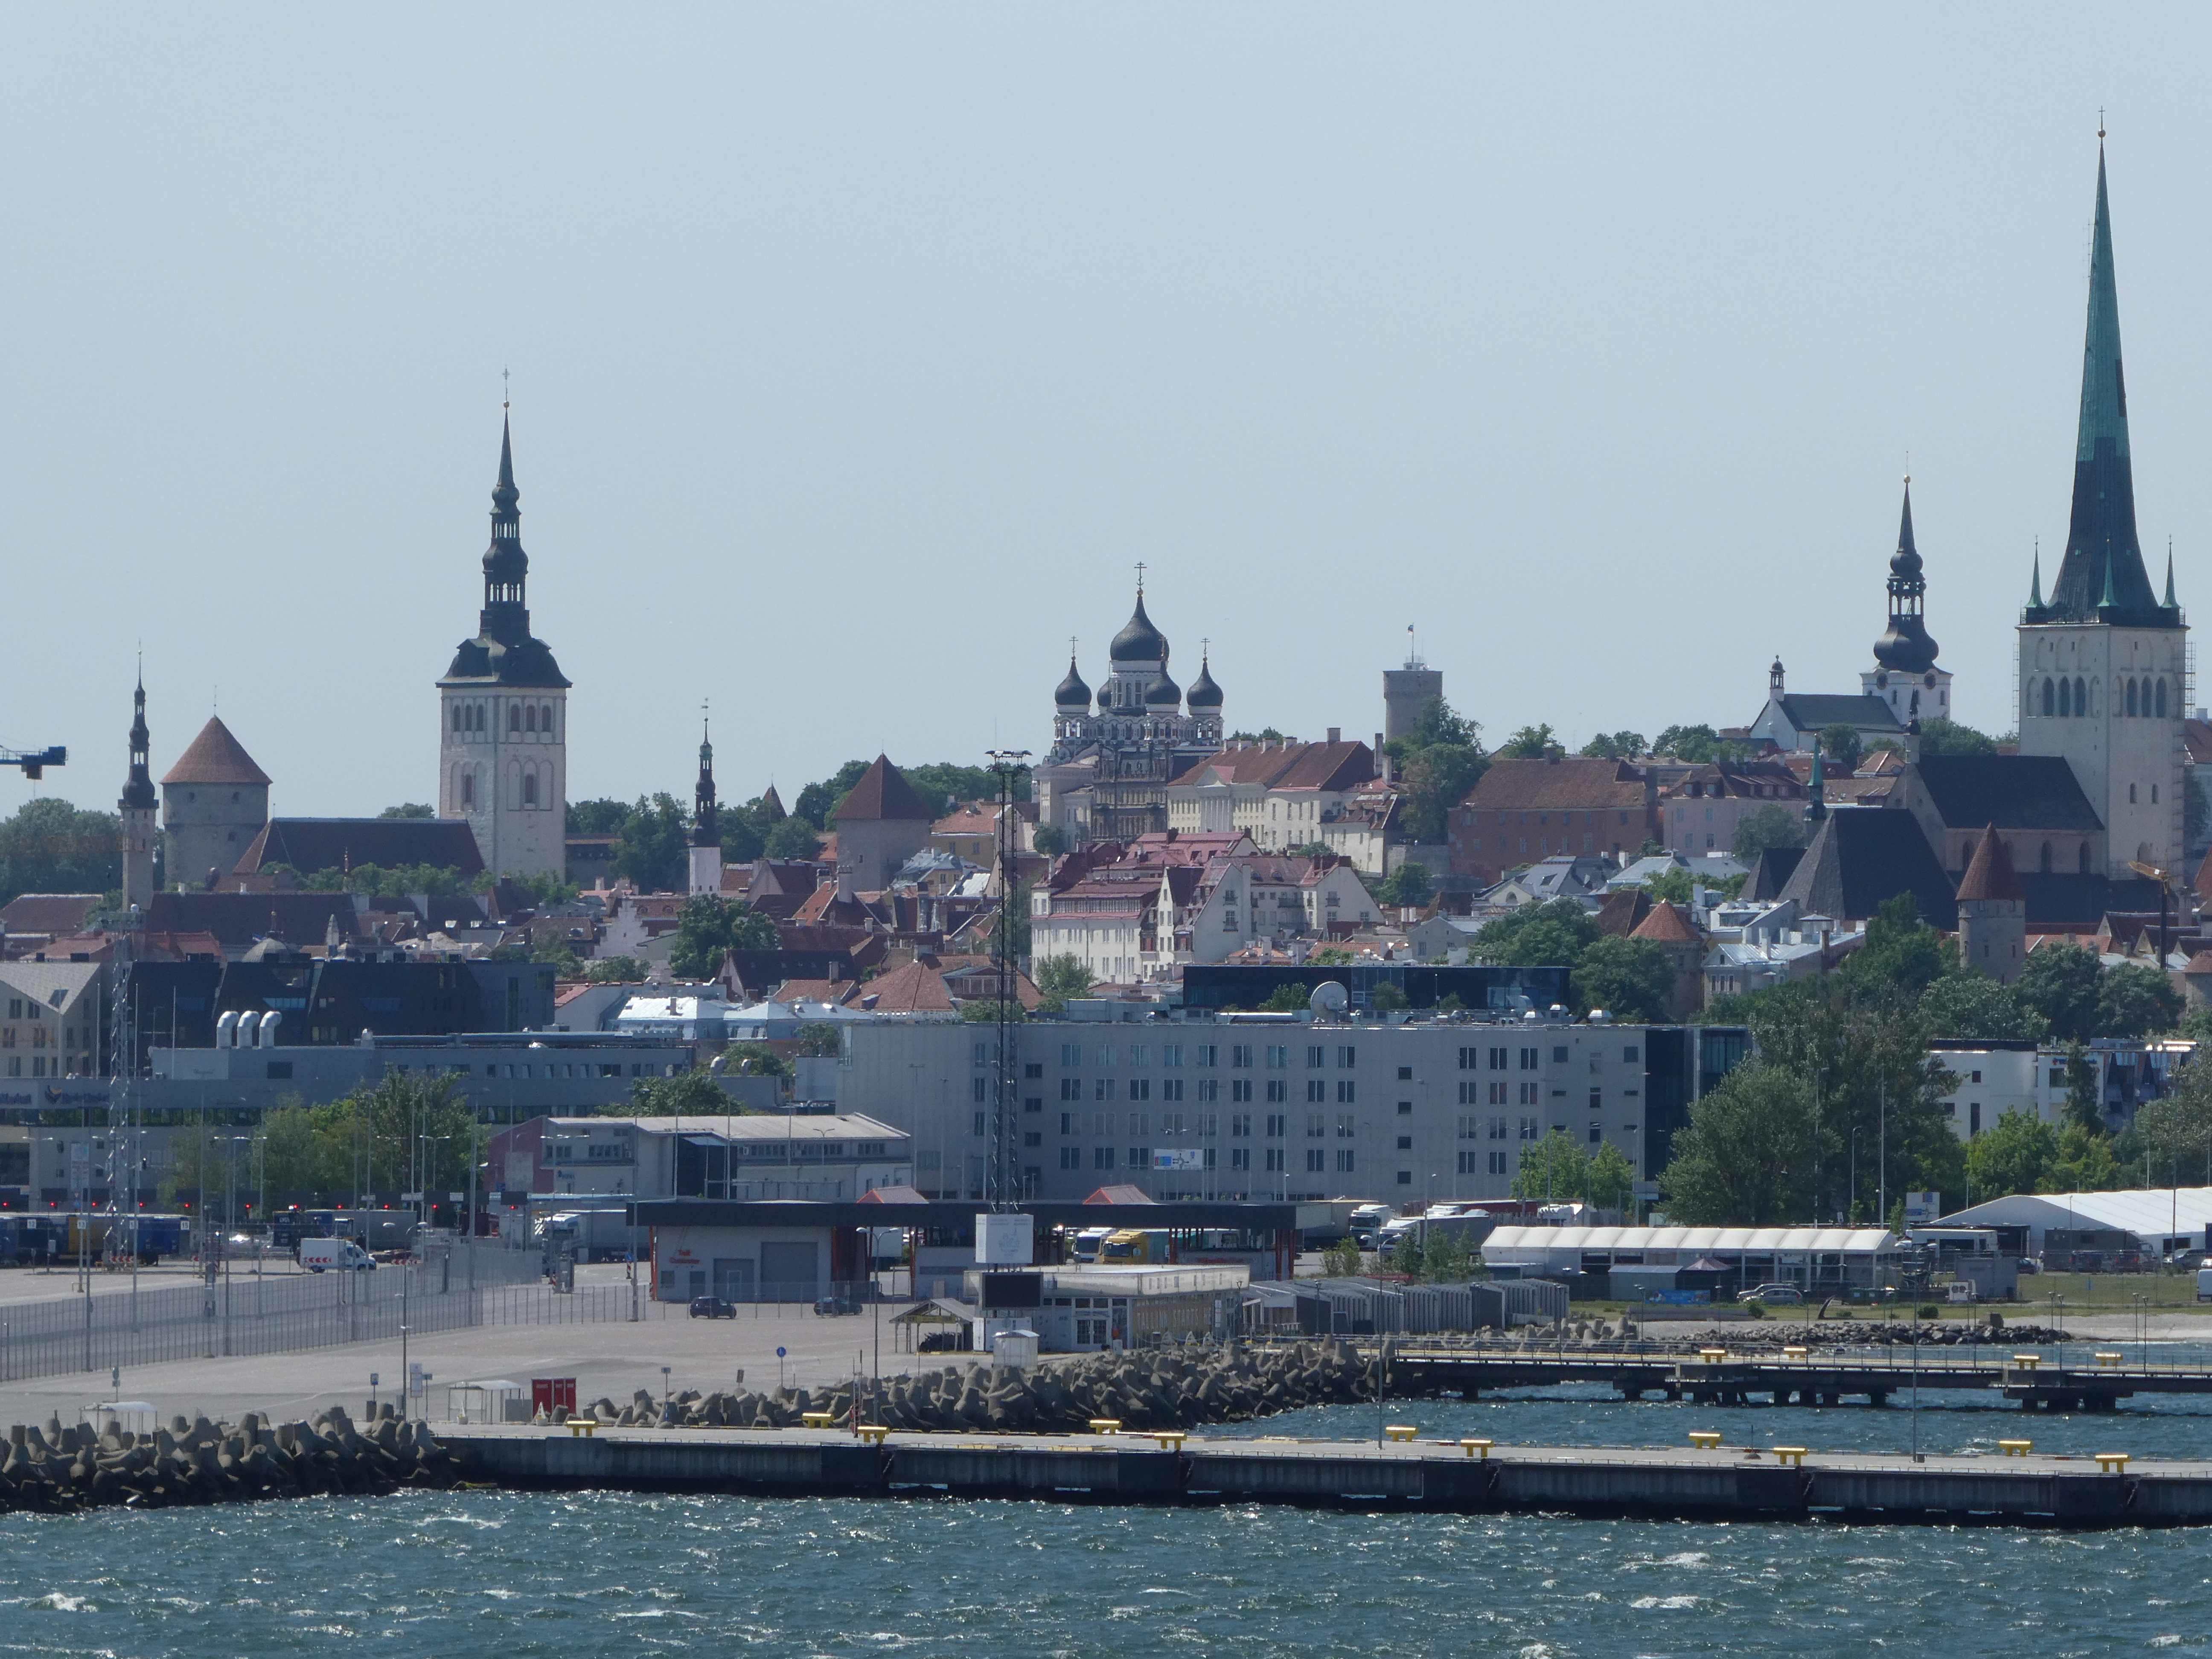 Looking back onto the old city of Tallinn from the ferry